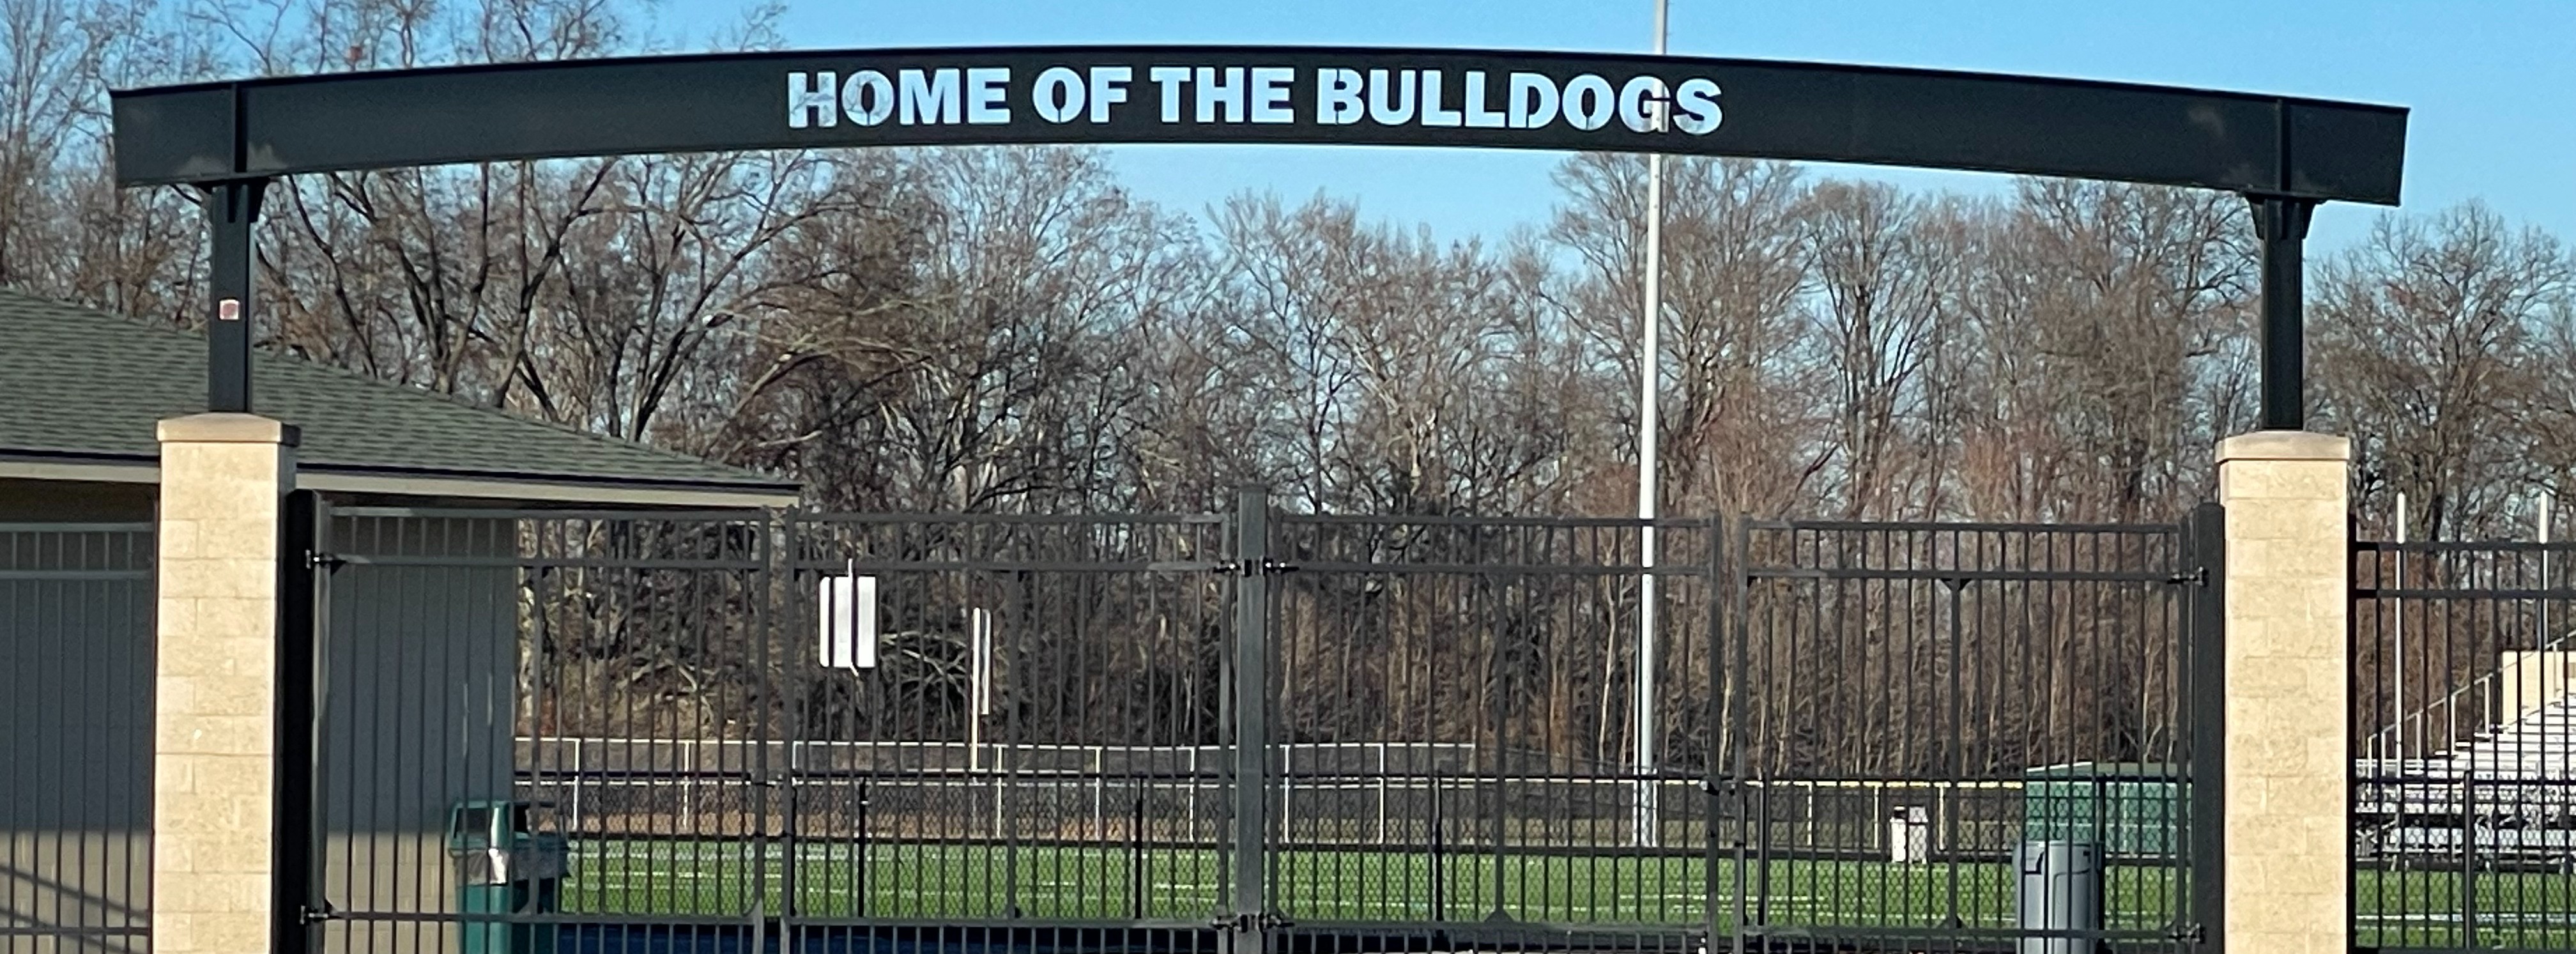 Home of the bulldogs